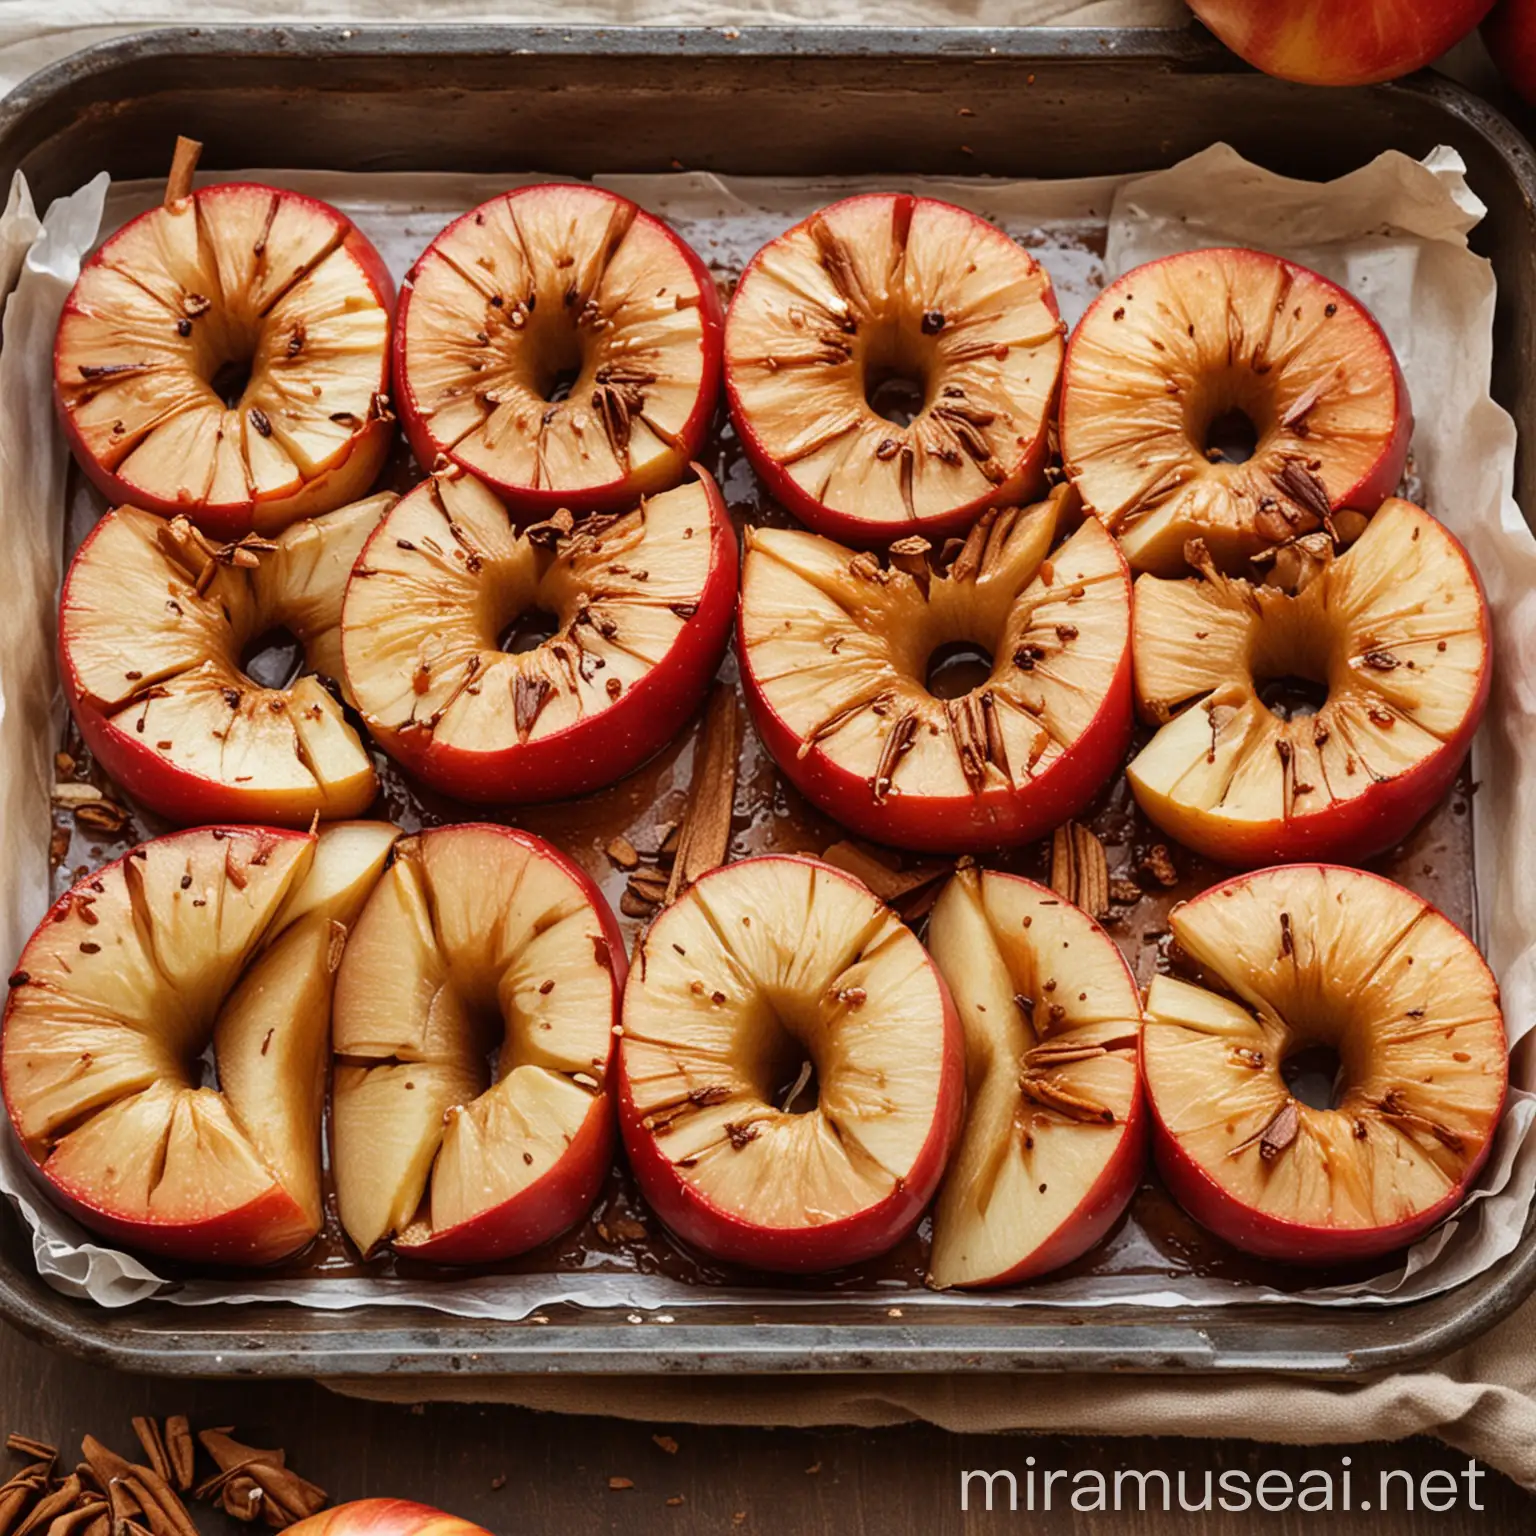 Baked  sliced Apples with Cinnamon